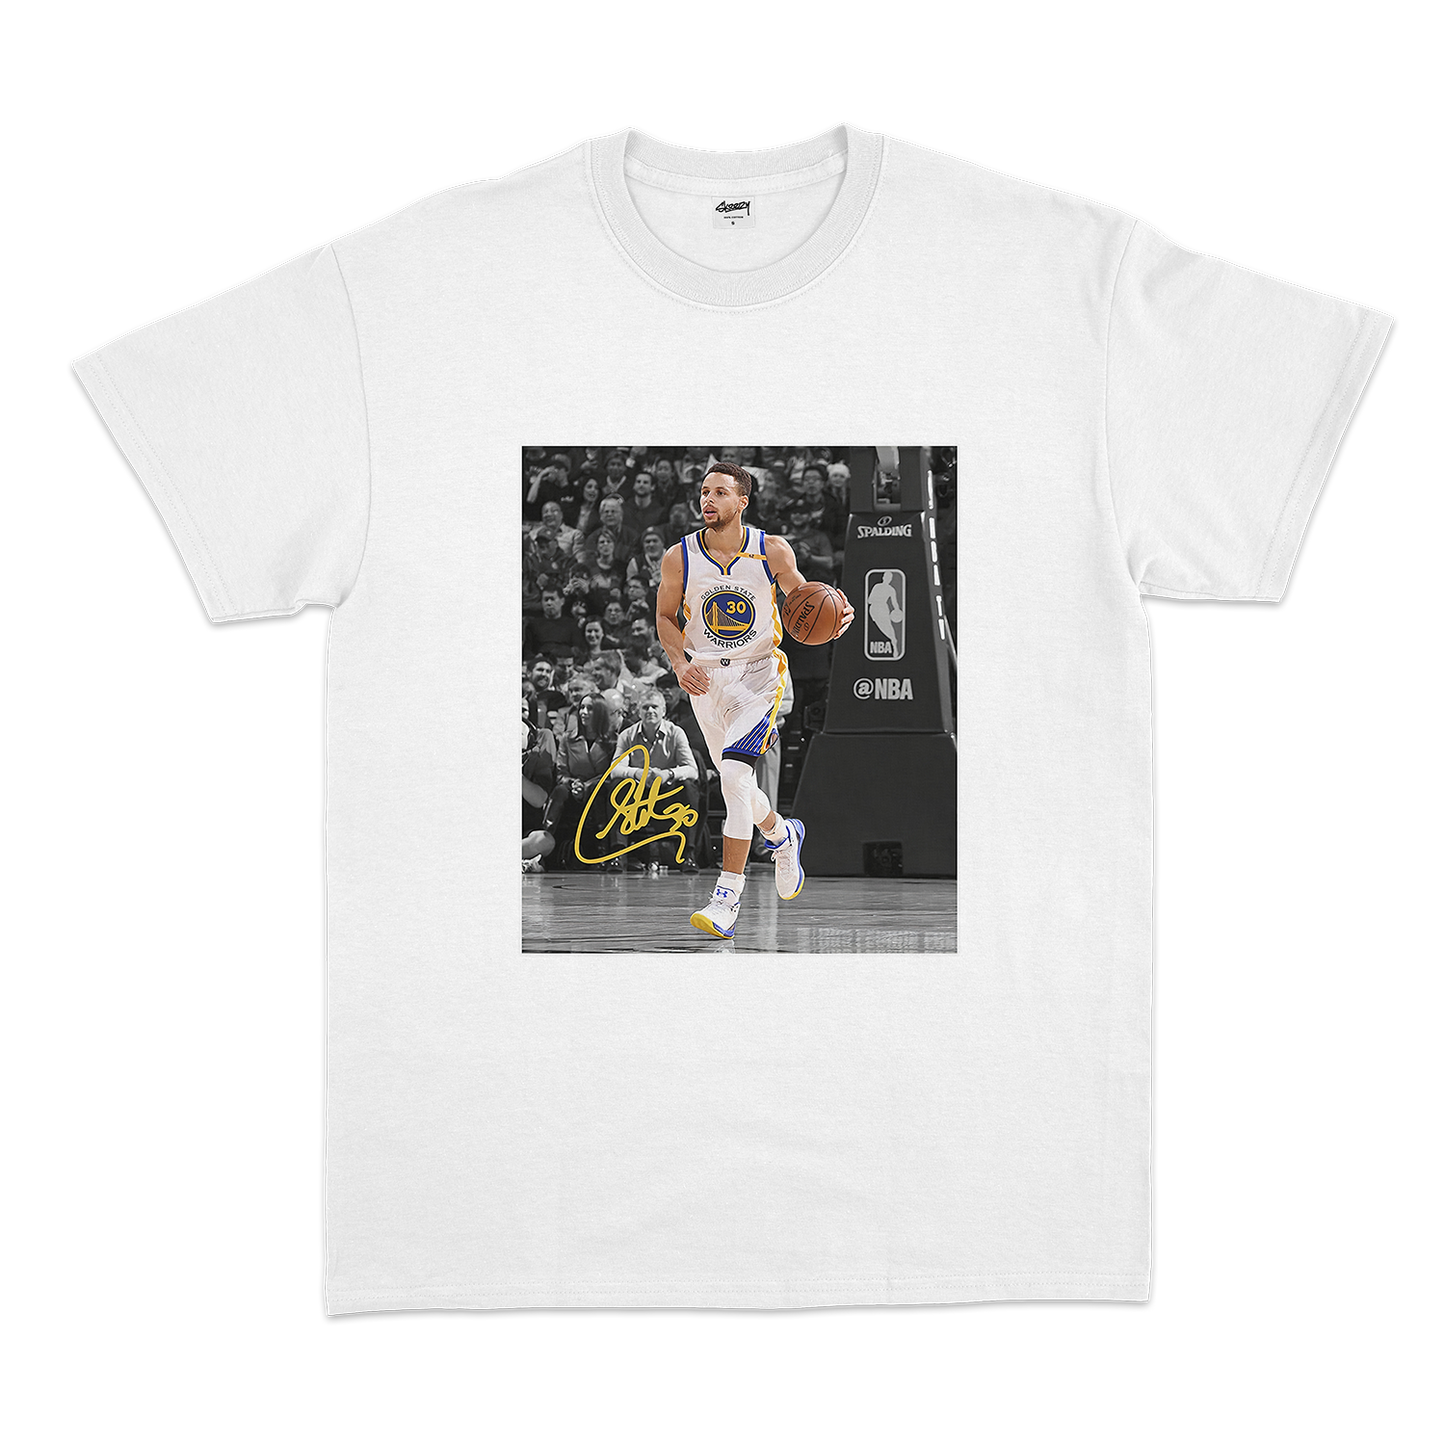 The Chef Tee